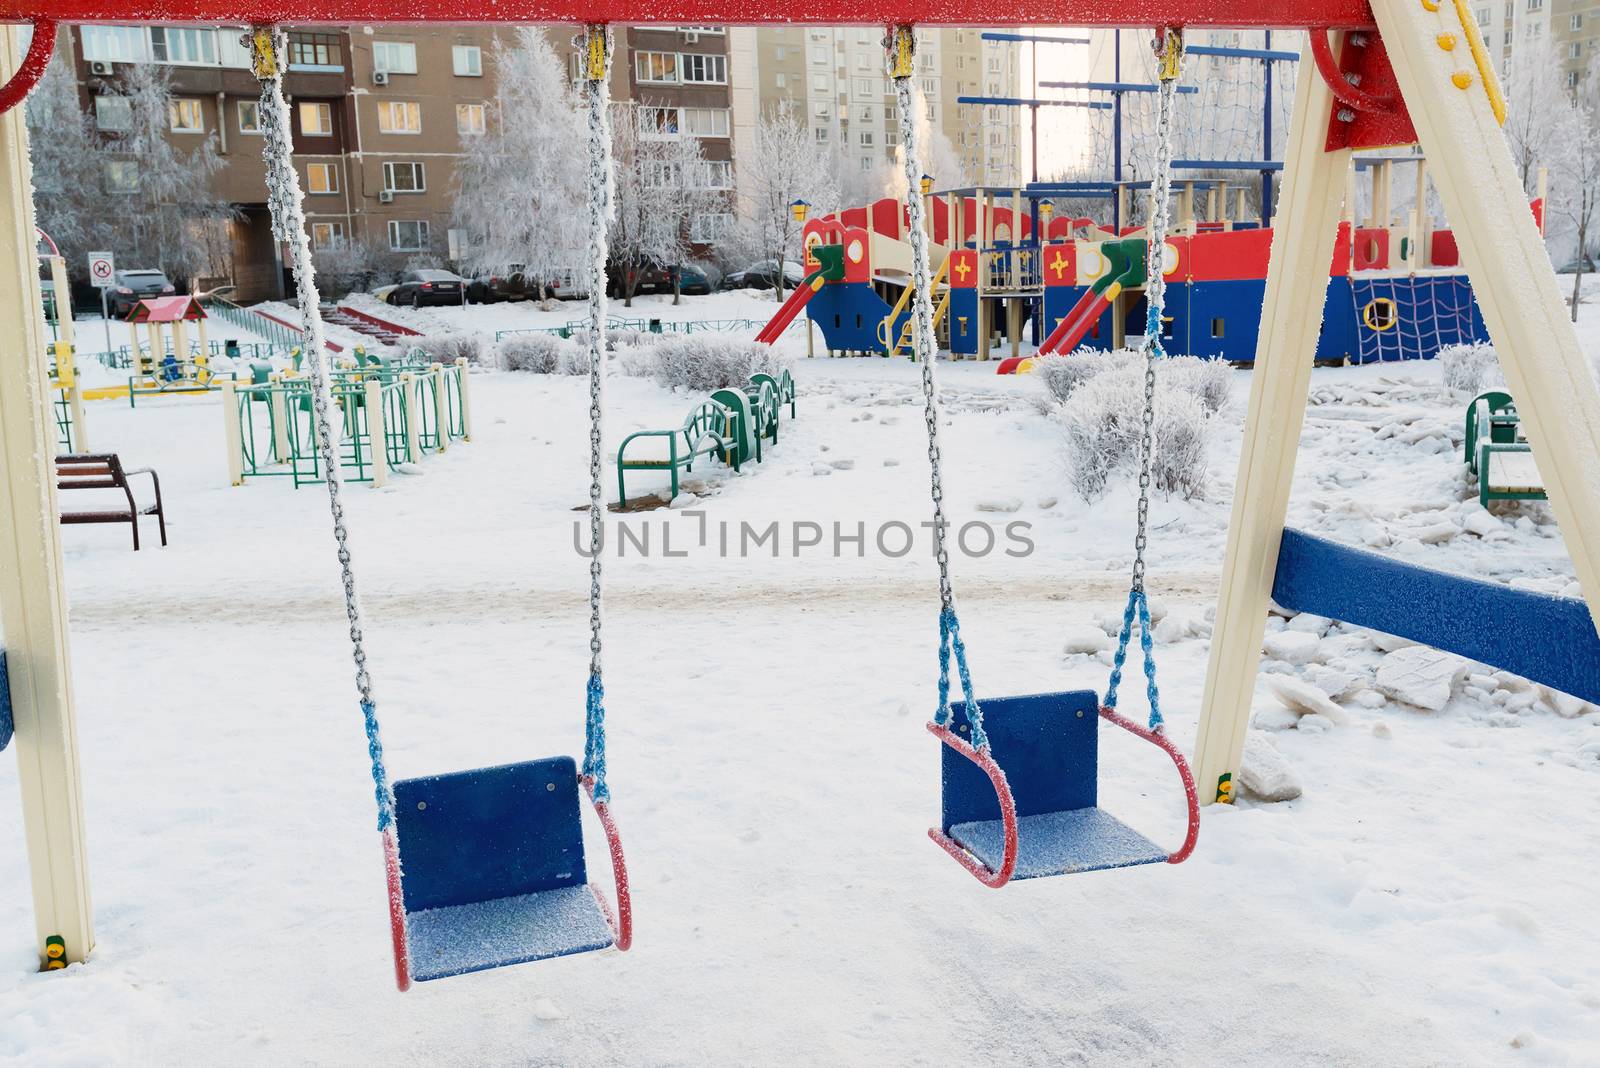 snow covered swing and slide at playground in winter by olgavolodina